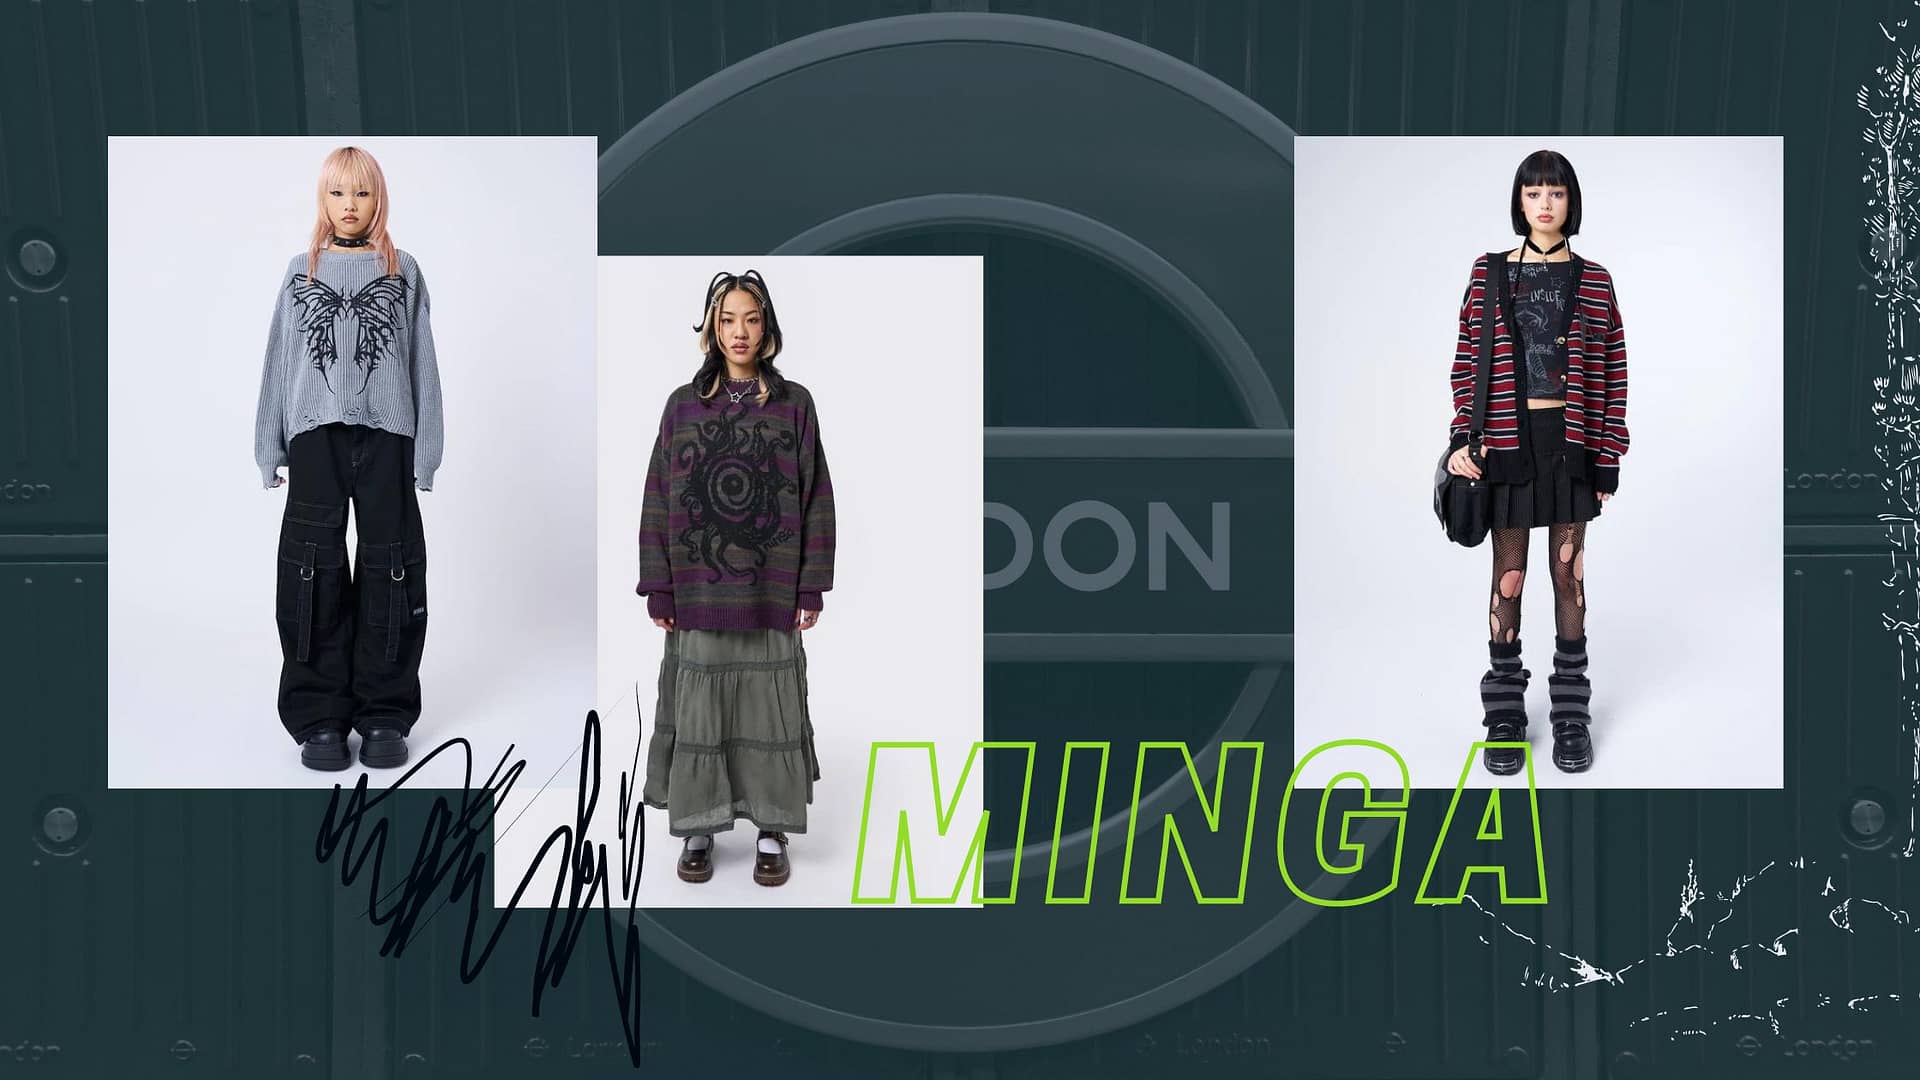 Minga London – Promoting Everyone to be Their Authentic Selves